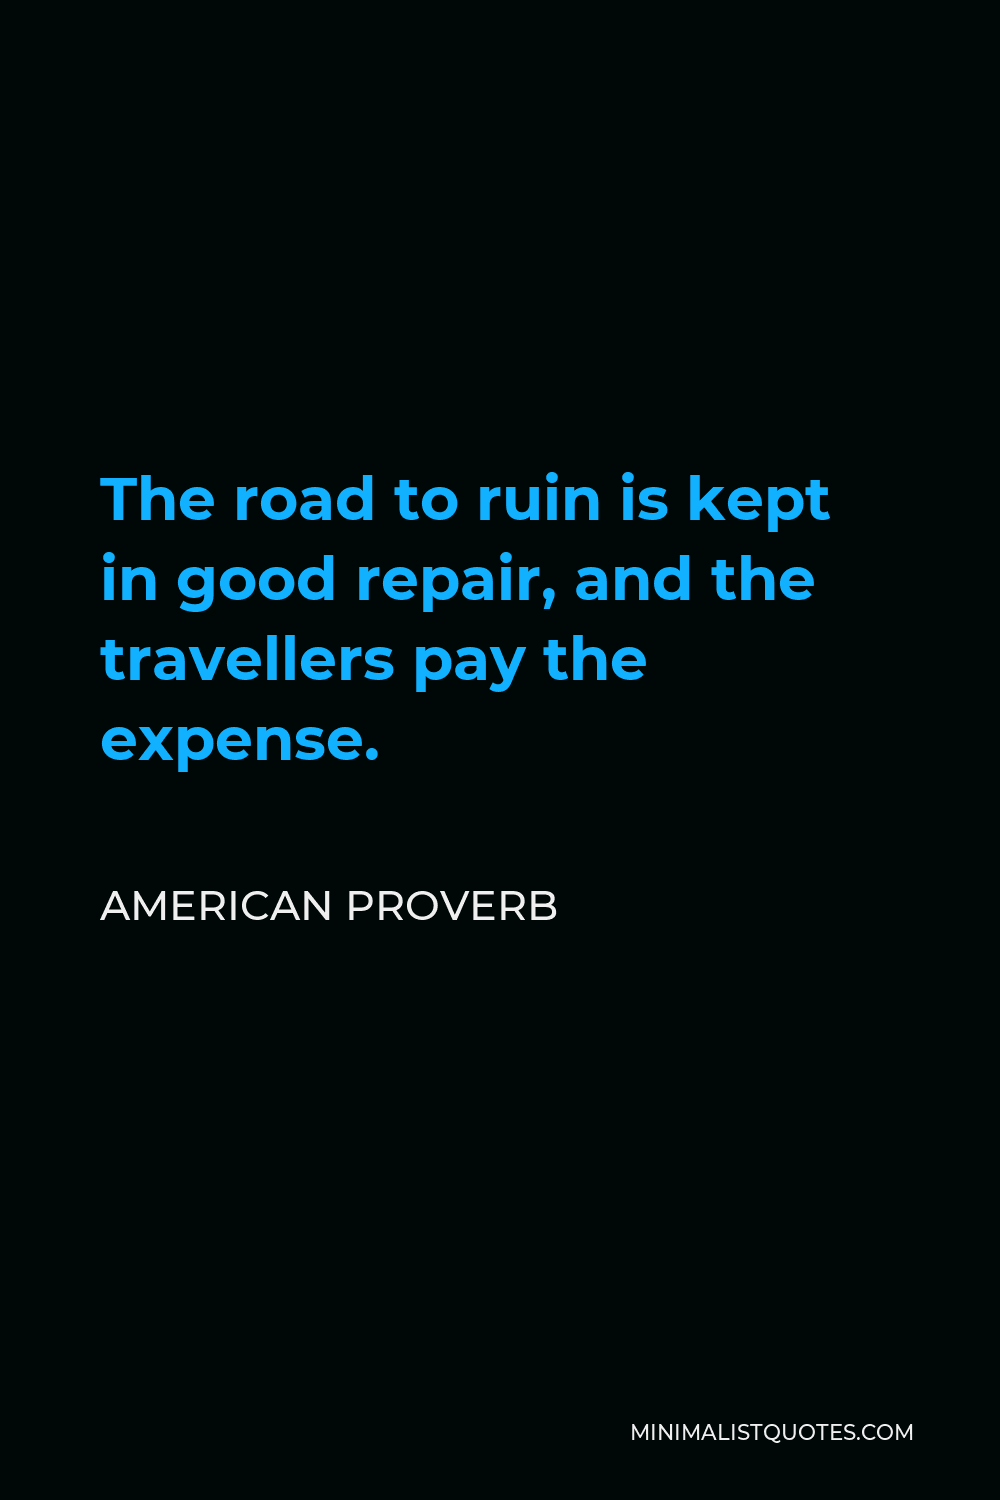 American Proverb Quote - The road to ruin is kept in good repair, and the travellers pay the expense.